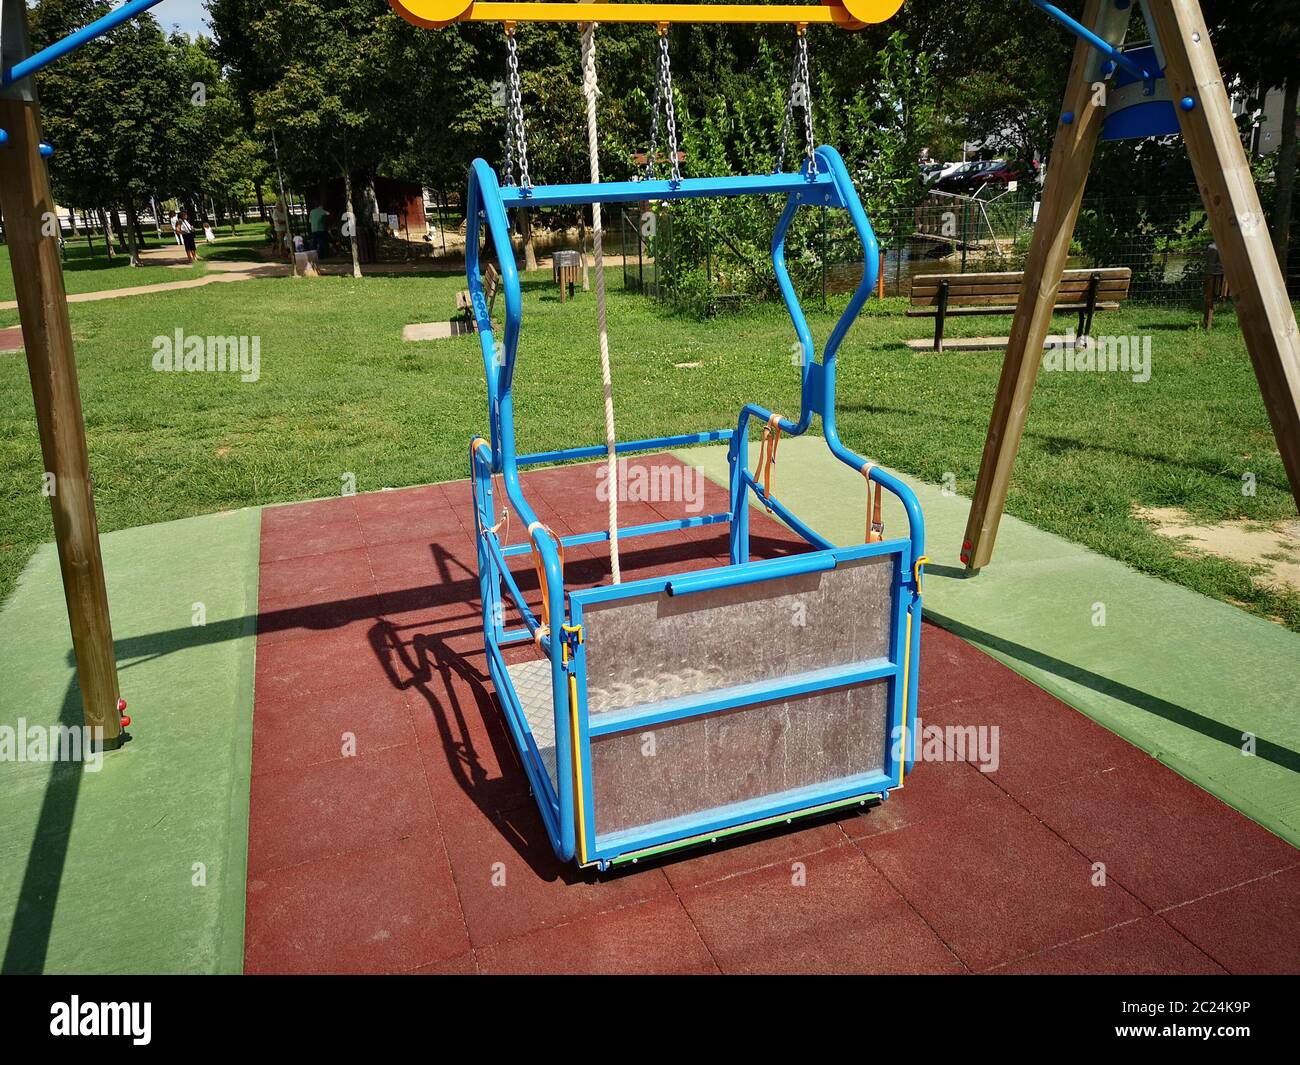 Disabled Swing High Resolution Stock Photography and Images - Alamy